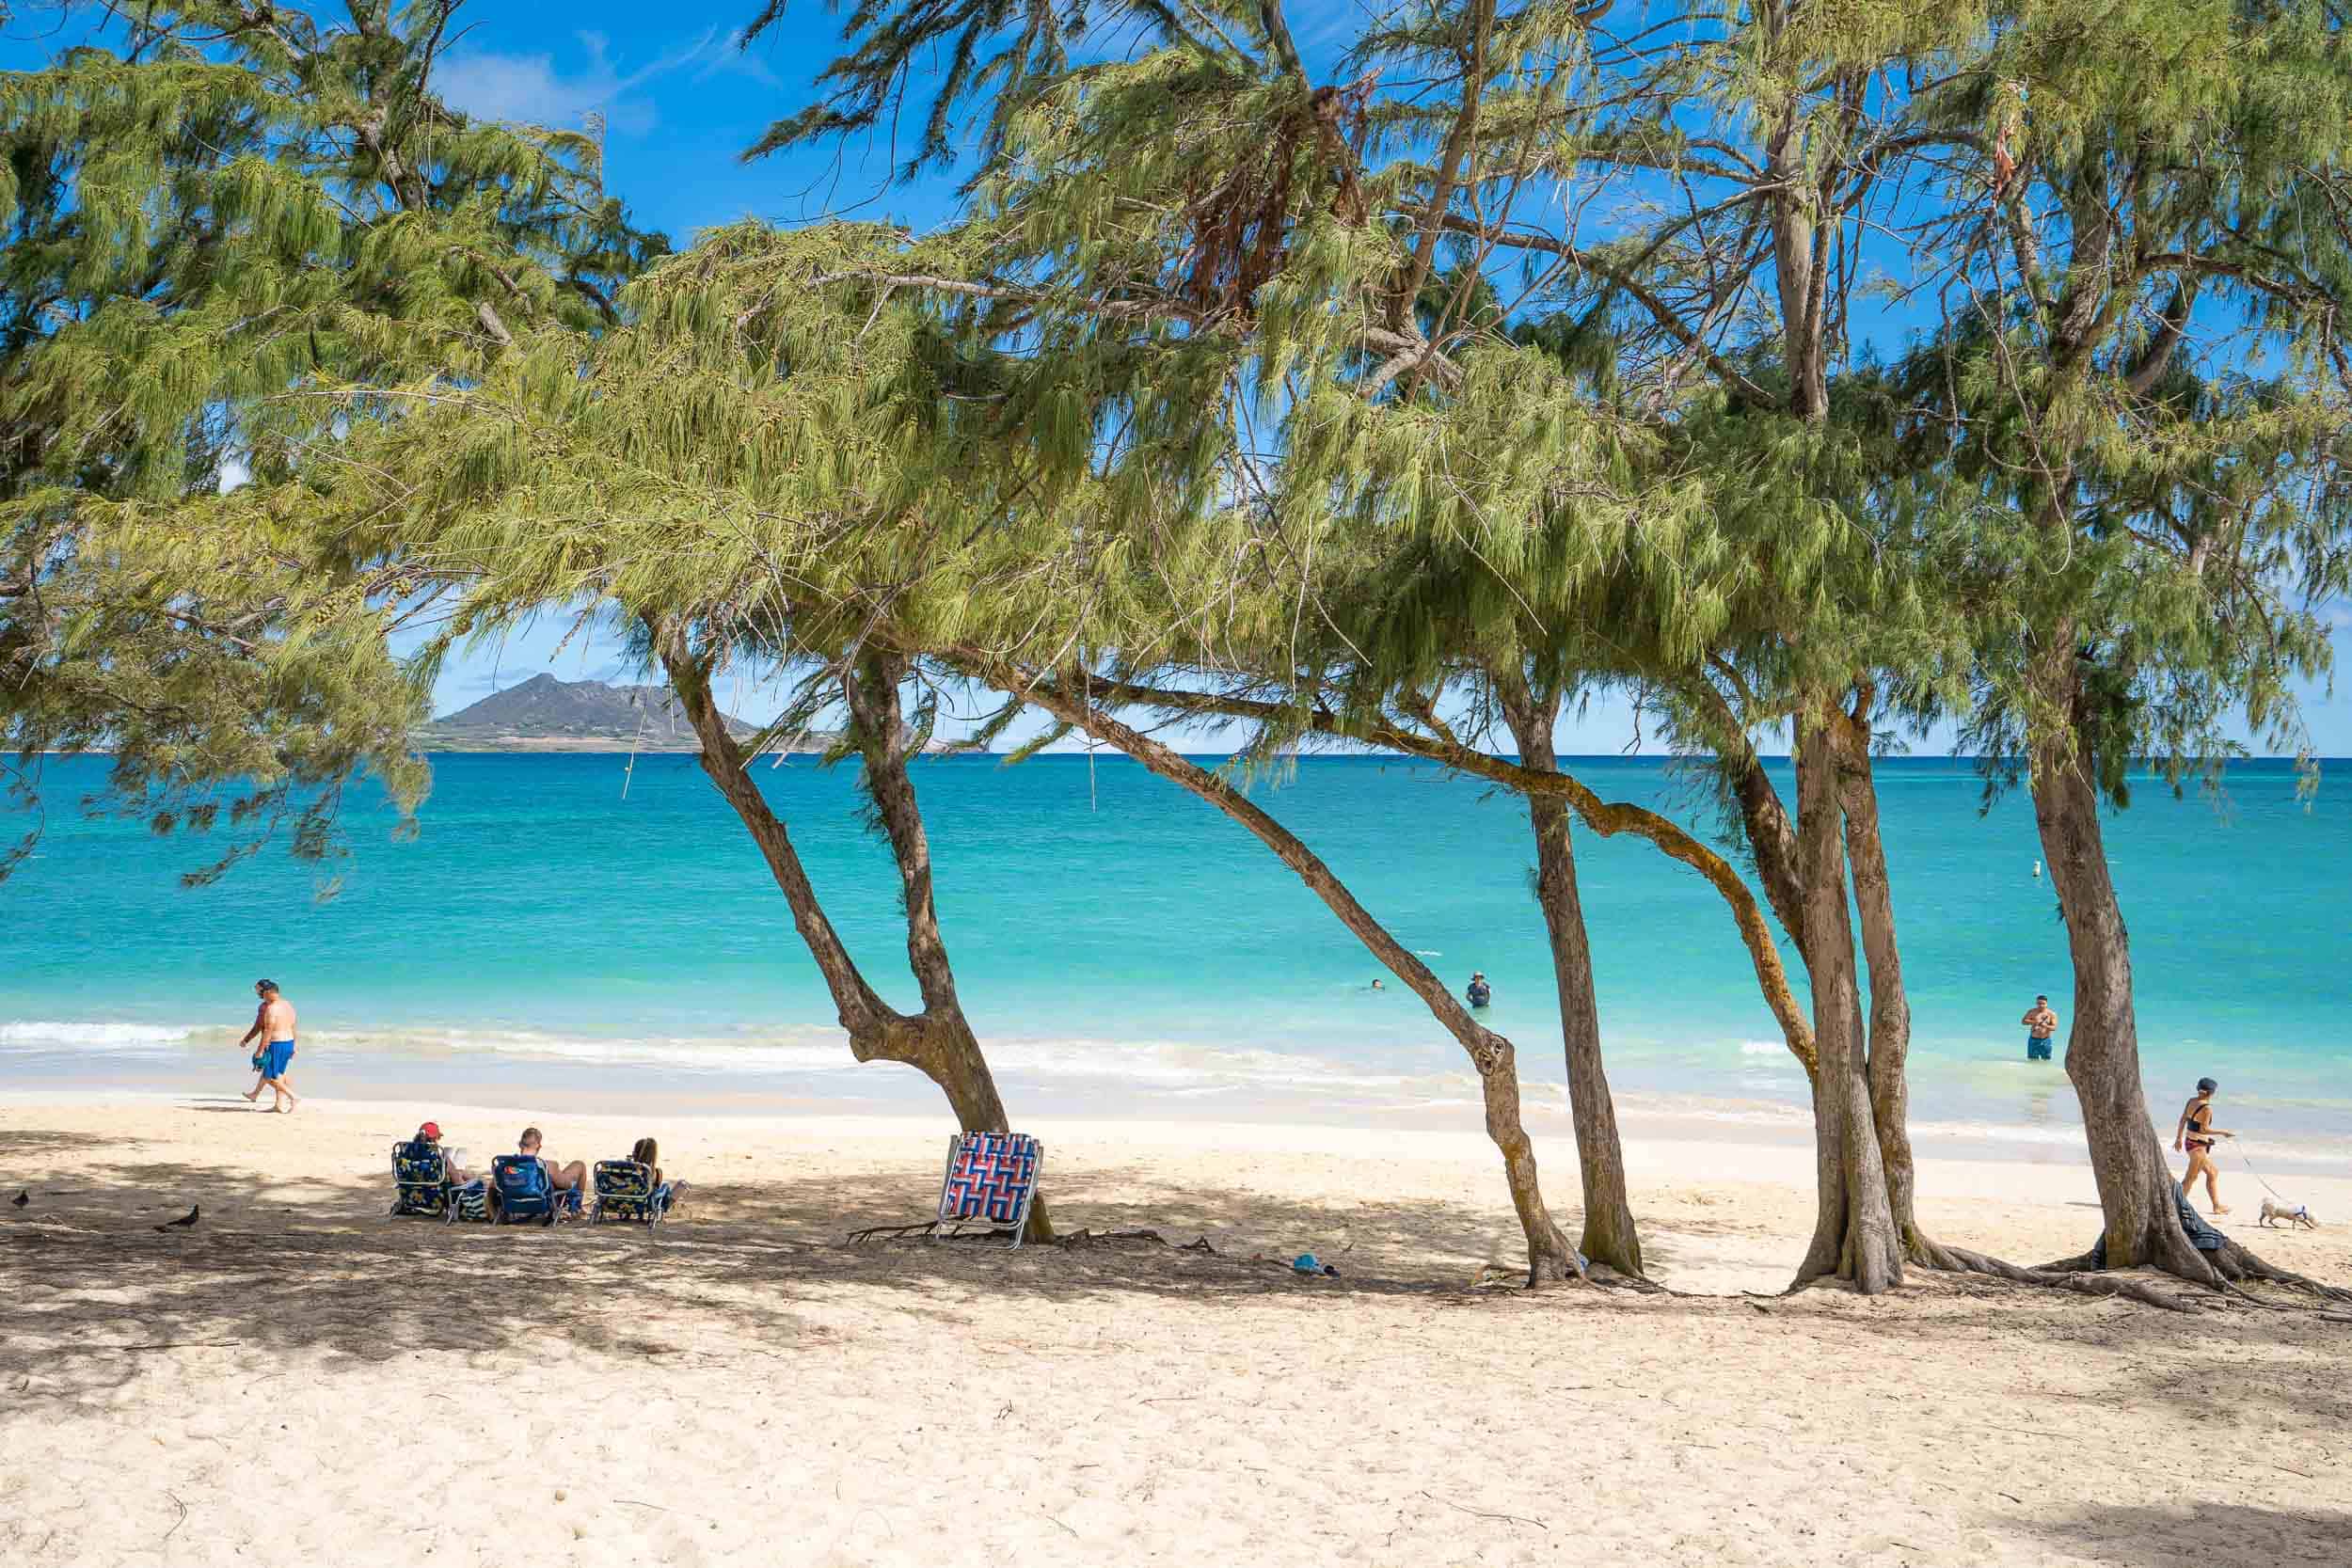 Kailua Beach is a great place to add to a 7 day Oahu itinerary